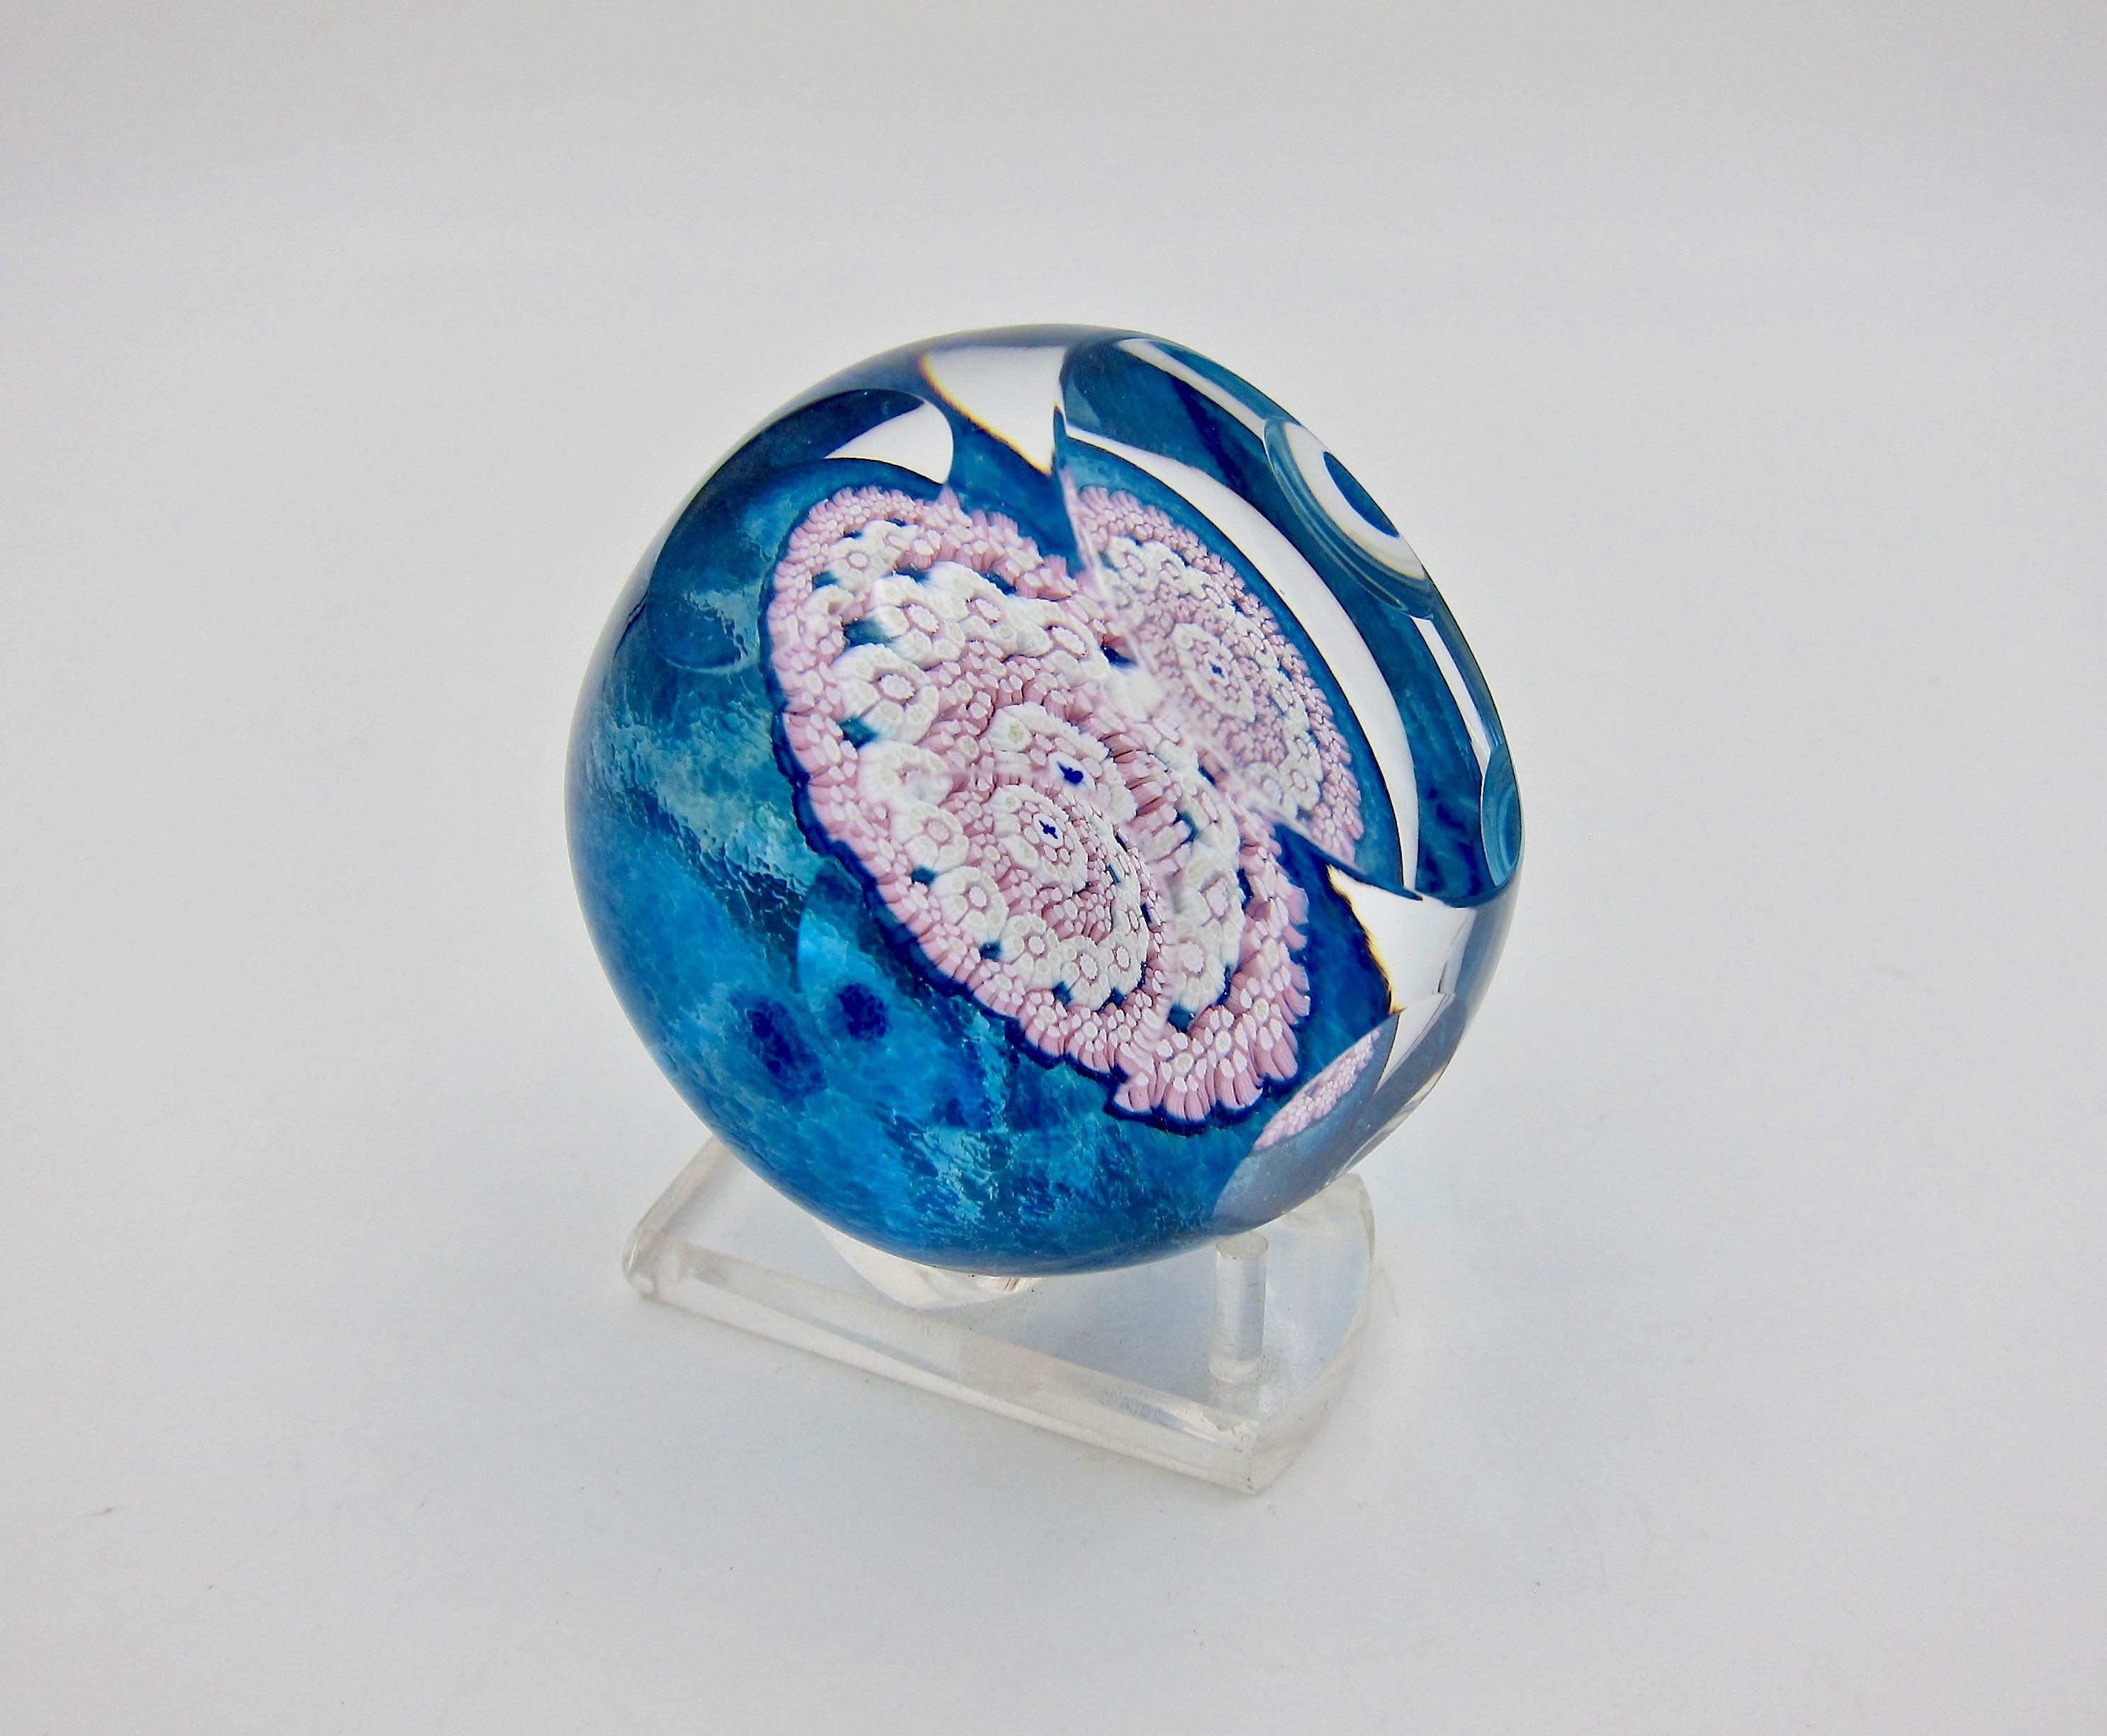 Modern English Whitefriars Millefiori Art Glass Paperweight with Butterfly, 1983